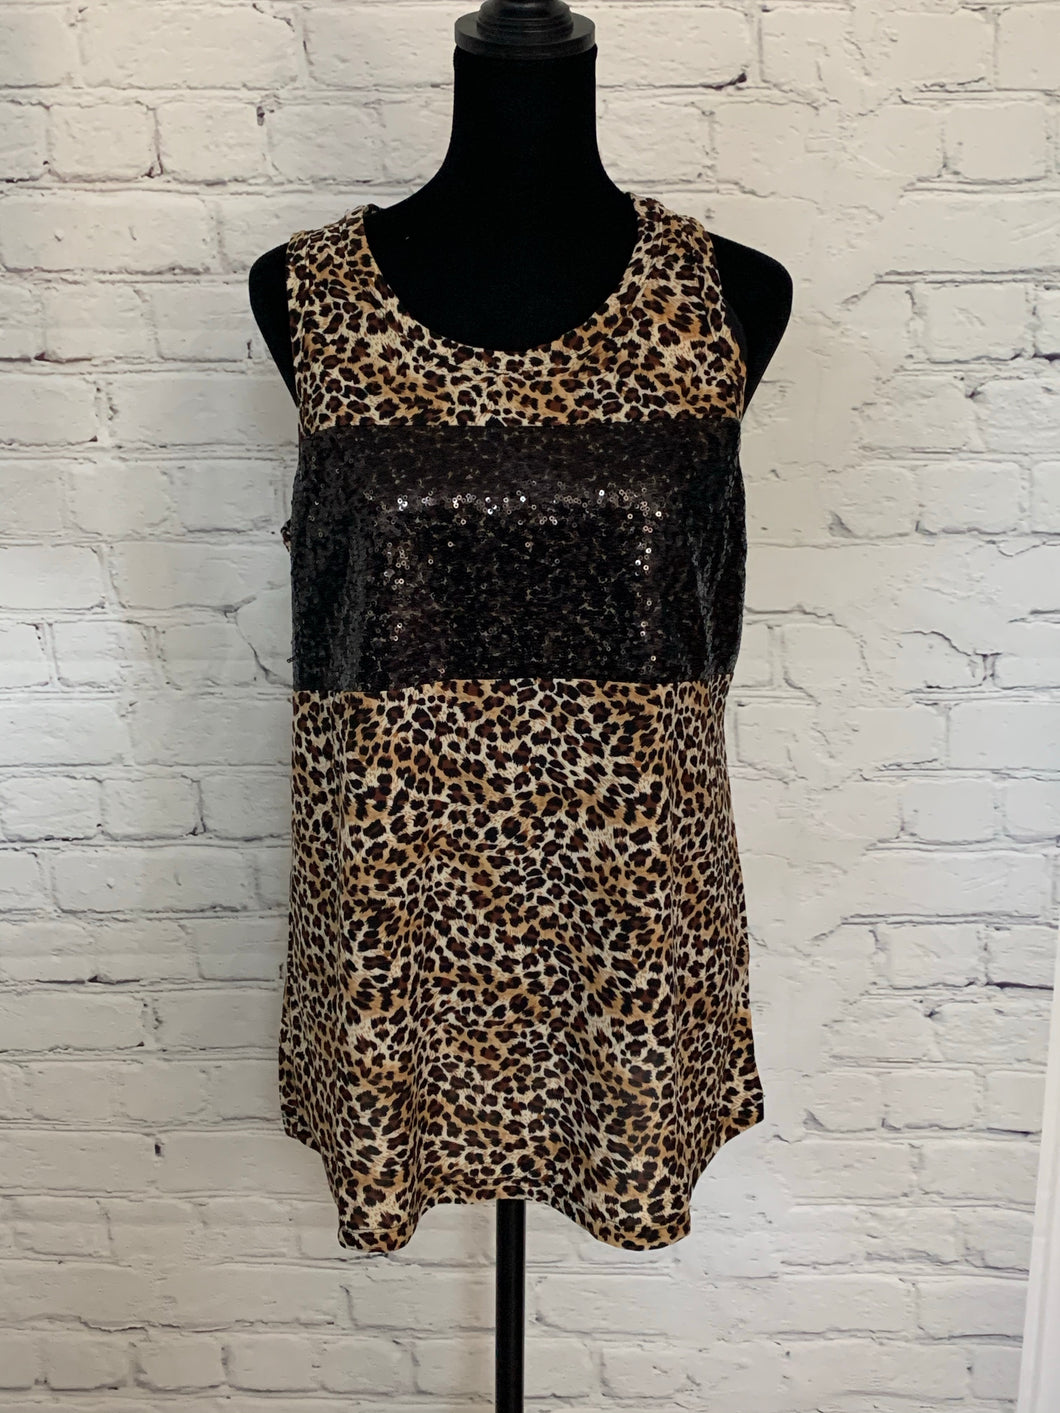 Leopard Seeveless Top W/ Black Sequins